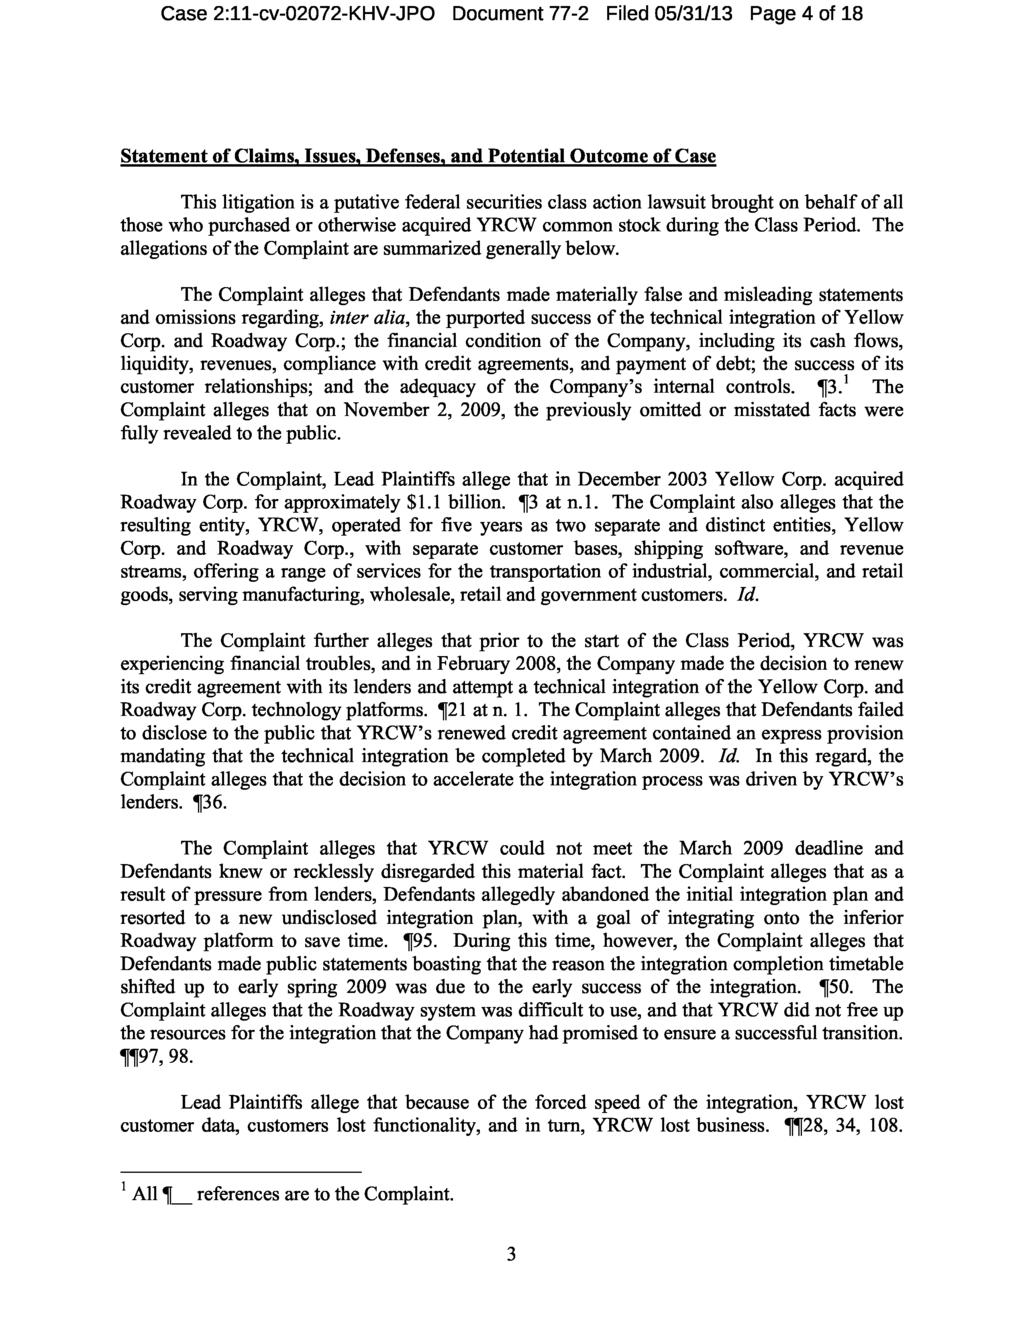 Case 2:11-cv-02072-KHV-JPO Document 77-2 Filed 05/31/13 Page 4 of 18 Statement of Claims, Issues, Defenses, and Potential Outcome of Case This litigation is a putative federal securities class action